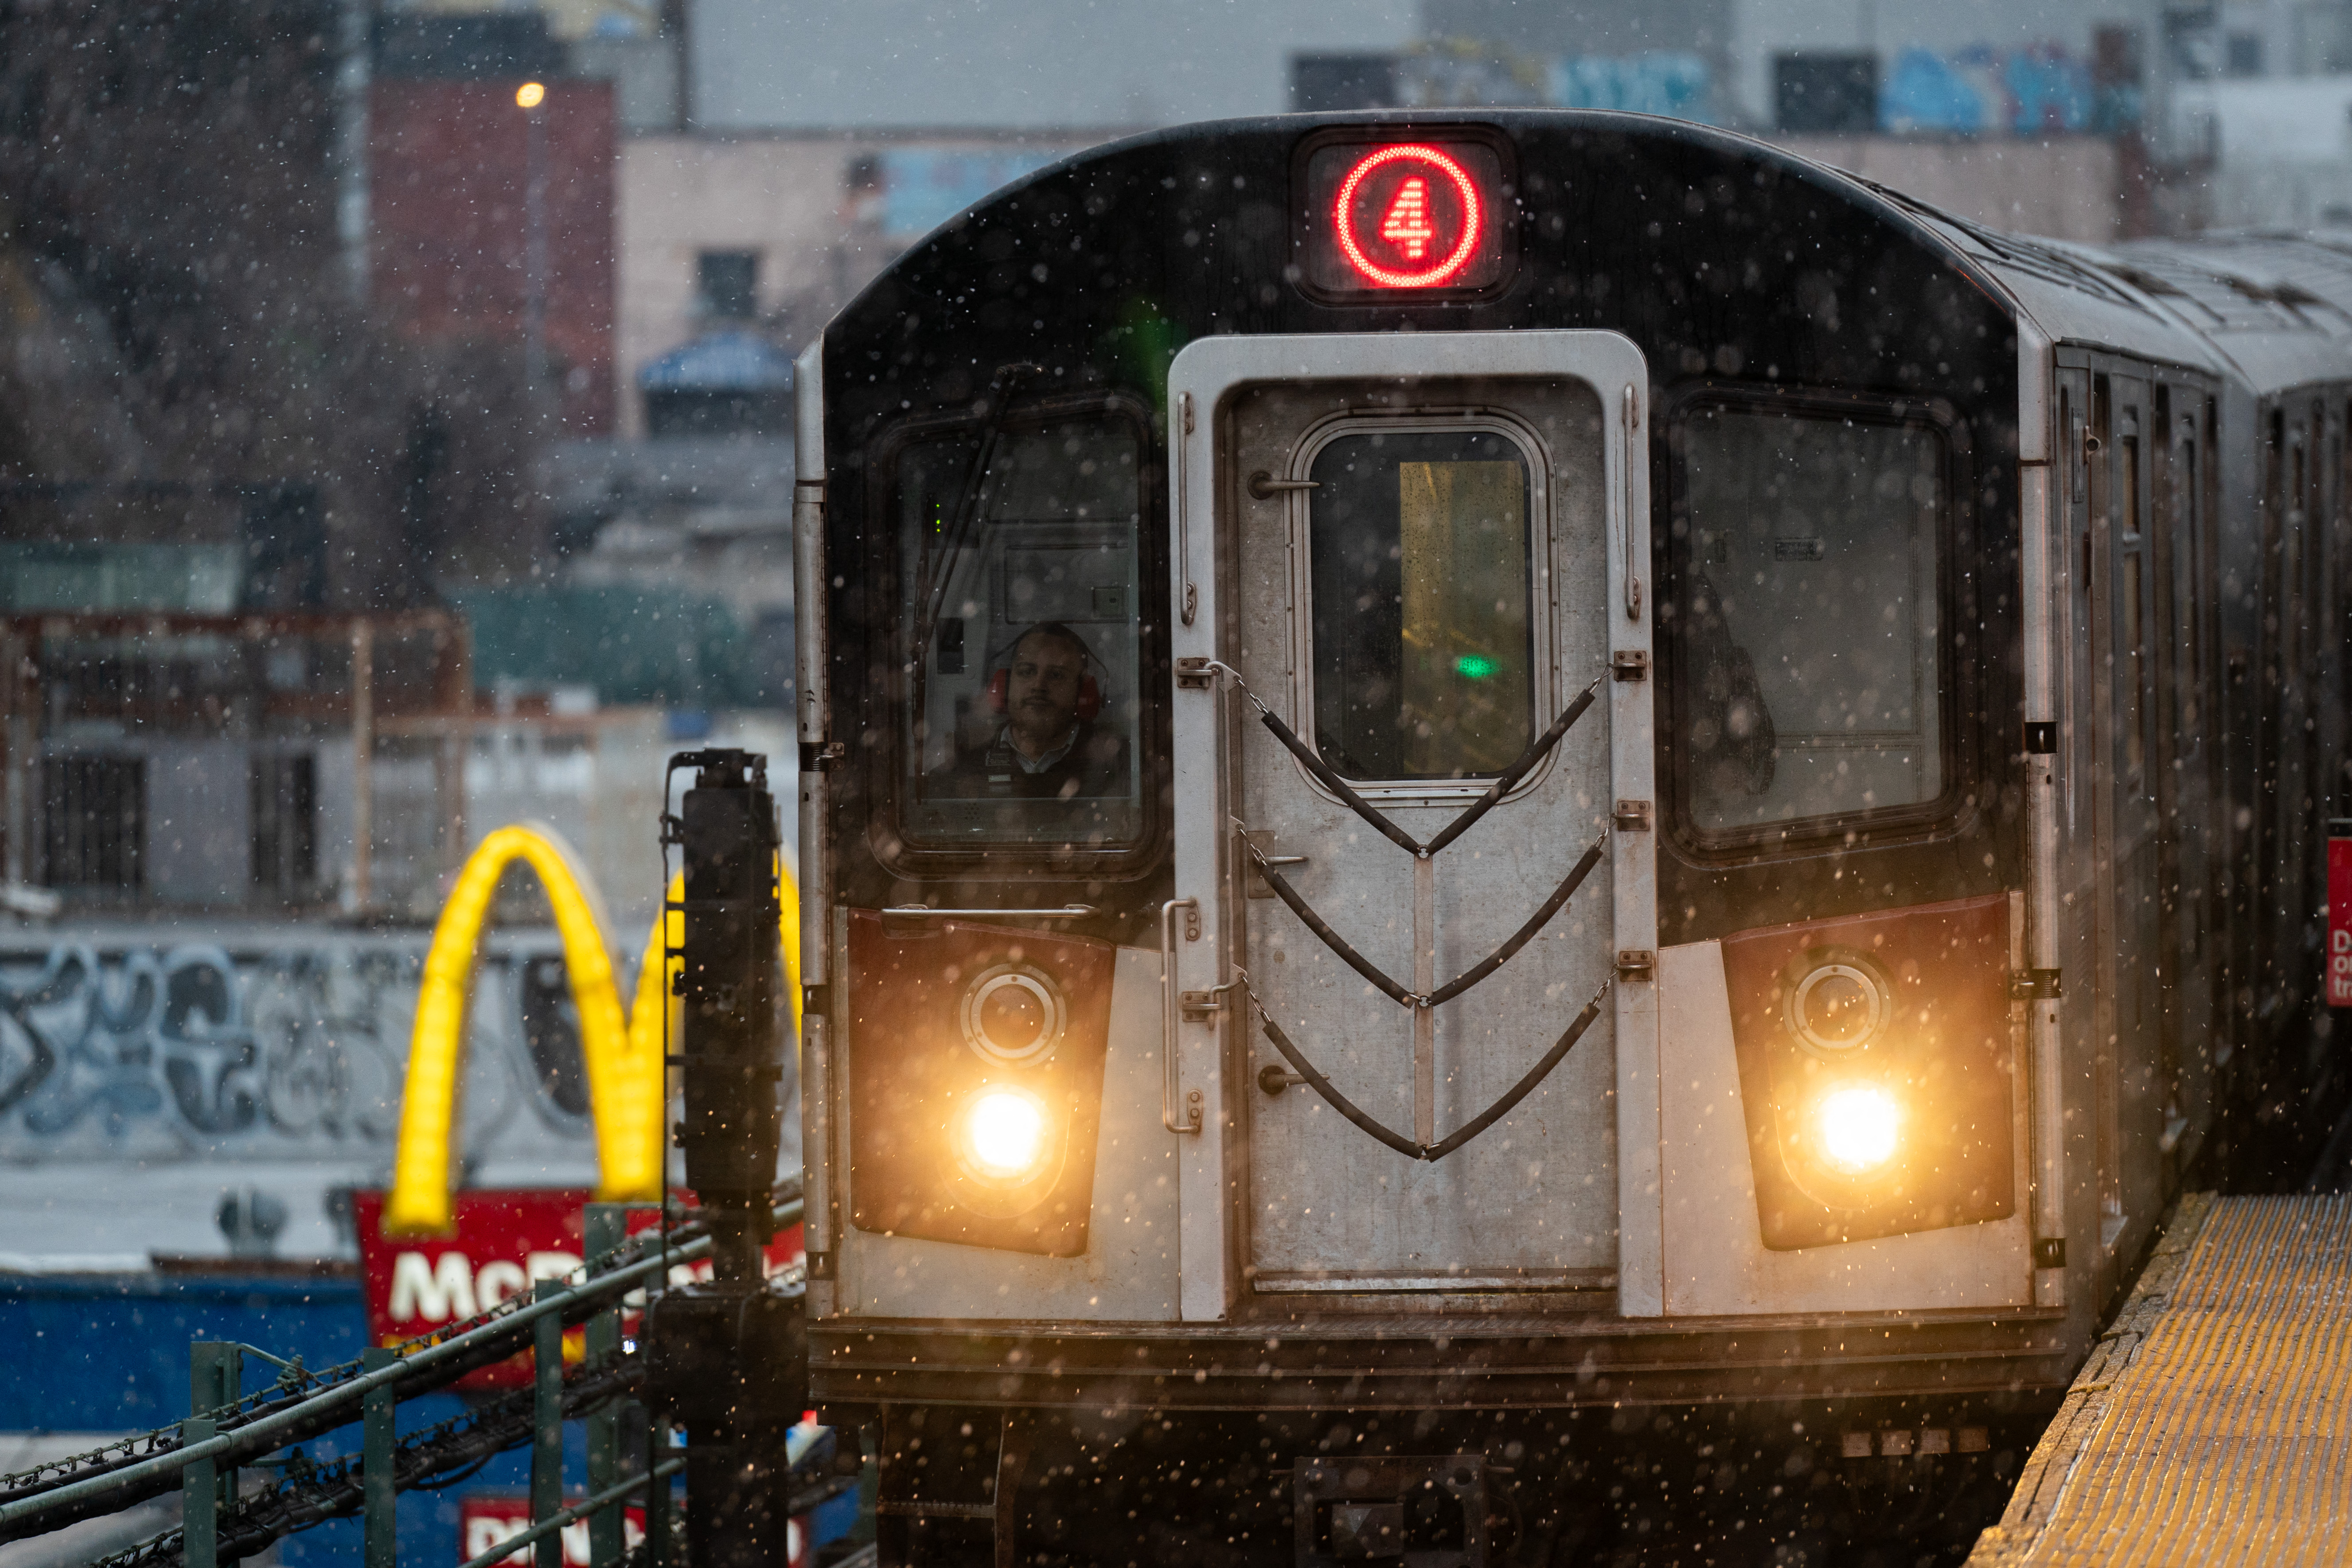 A 4 Subway train operates during snowfall in the Bronx.